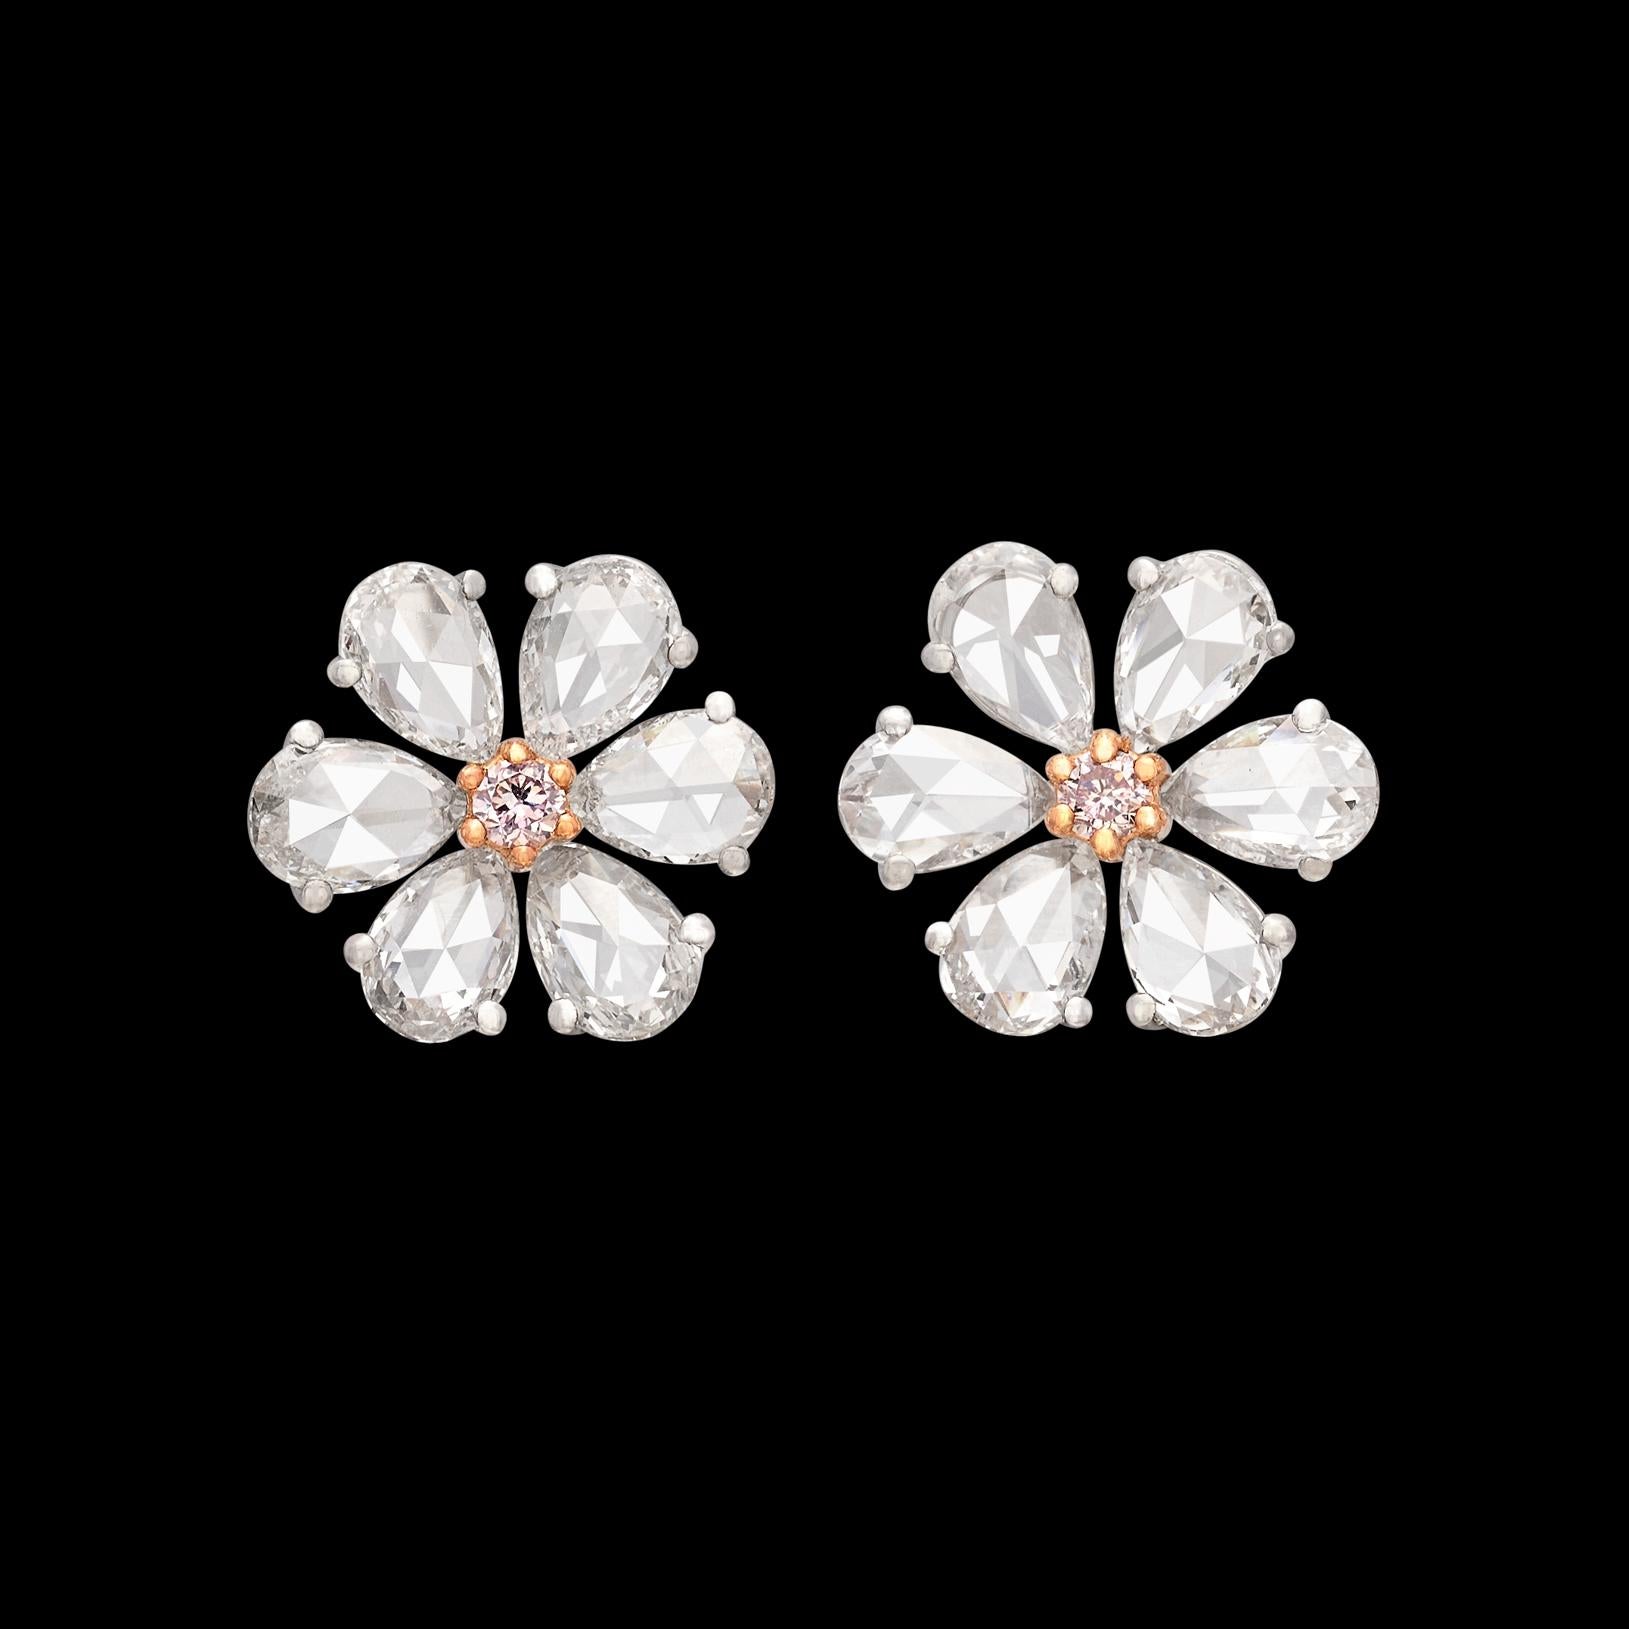 A floral stud with a pop of colored diamond in the center! These 18 karat white gold stunners feature six expertly cut pear shaped diamond petals on each ear, with a natural pink round brilliant cut diamond making up the center of the flower design.